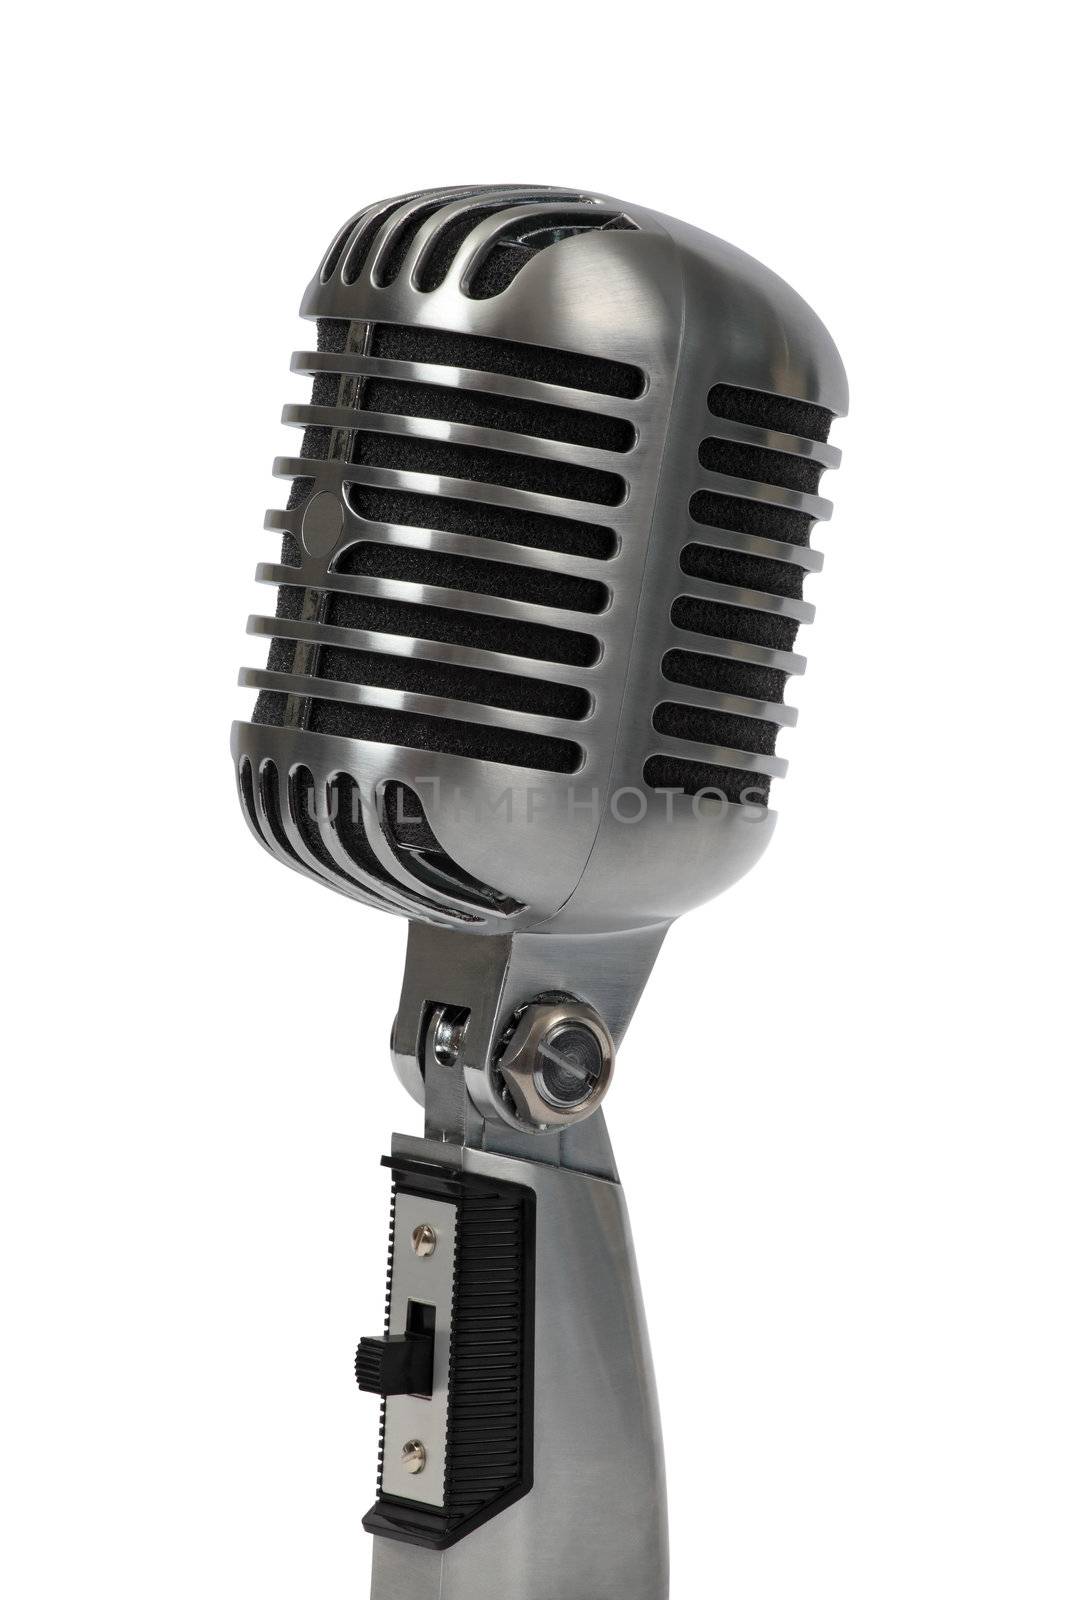 Retro studio microphone isolated on white background.  Clipping path included.